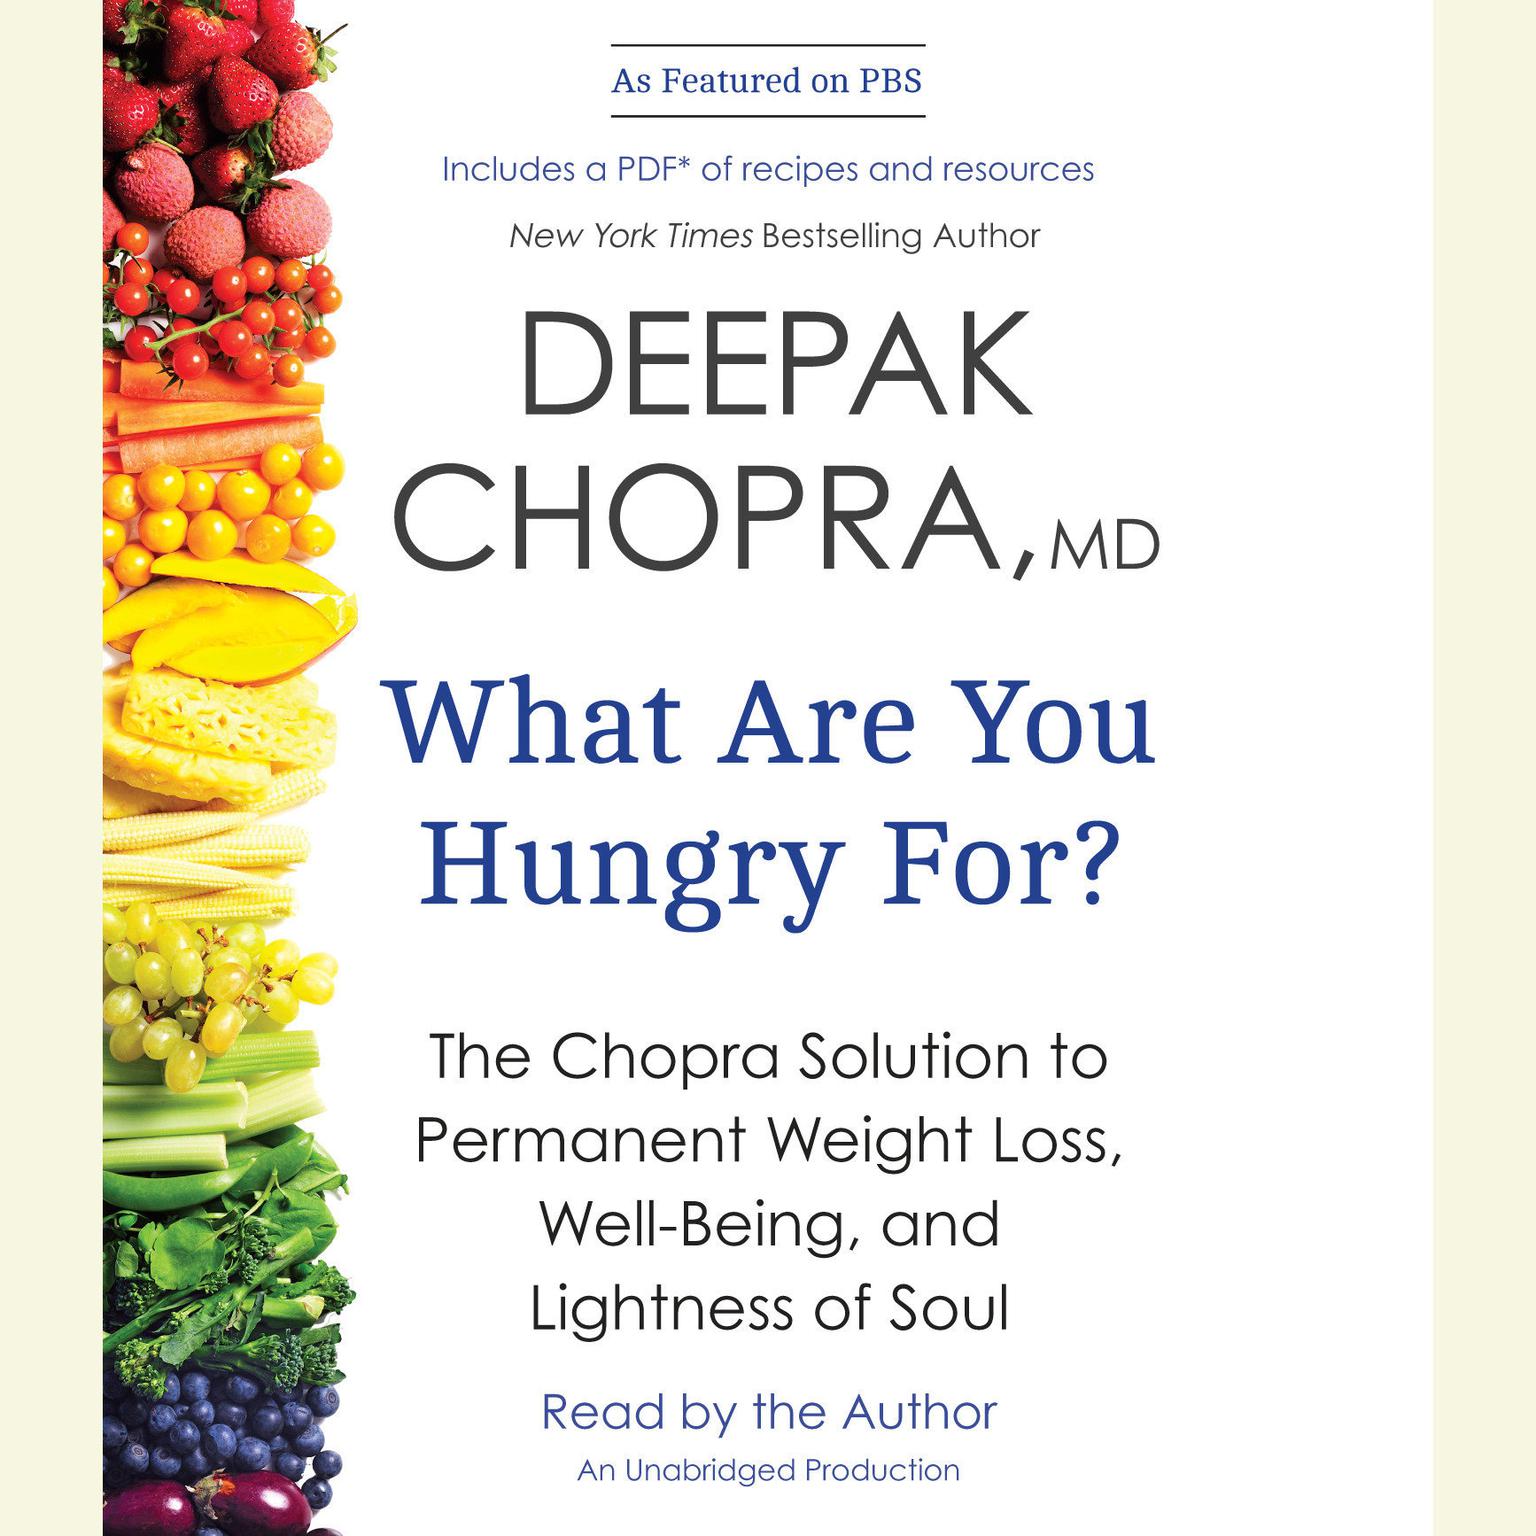 What Are You Hungry For?: The Chopra Solution to Permanent Weight Loss, Well-Being, and Lightness of Soul Audiobook, by Deepak Chopra